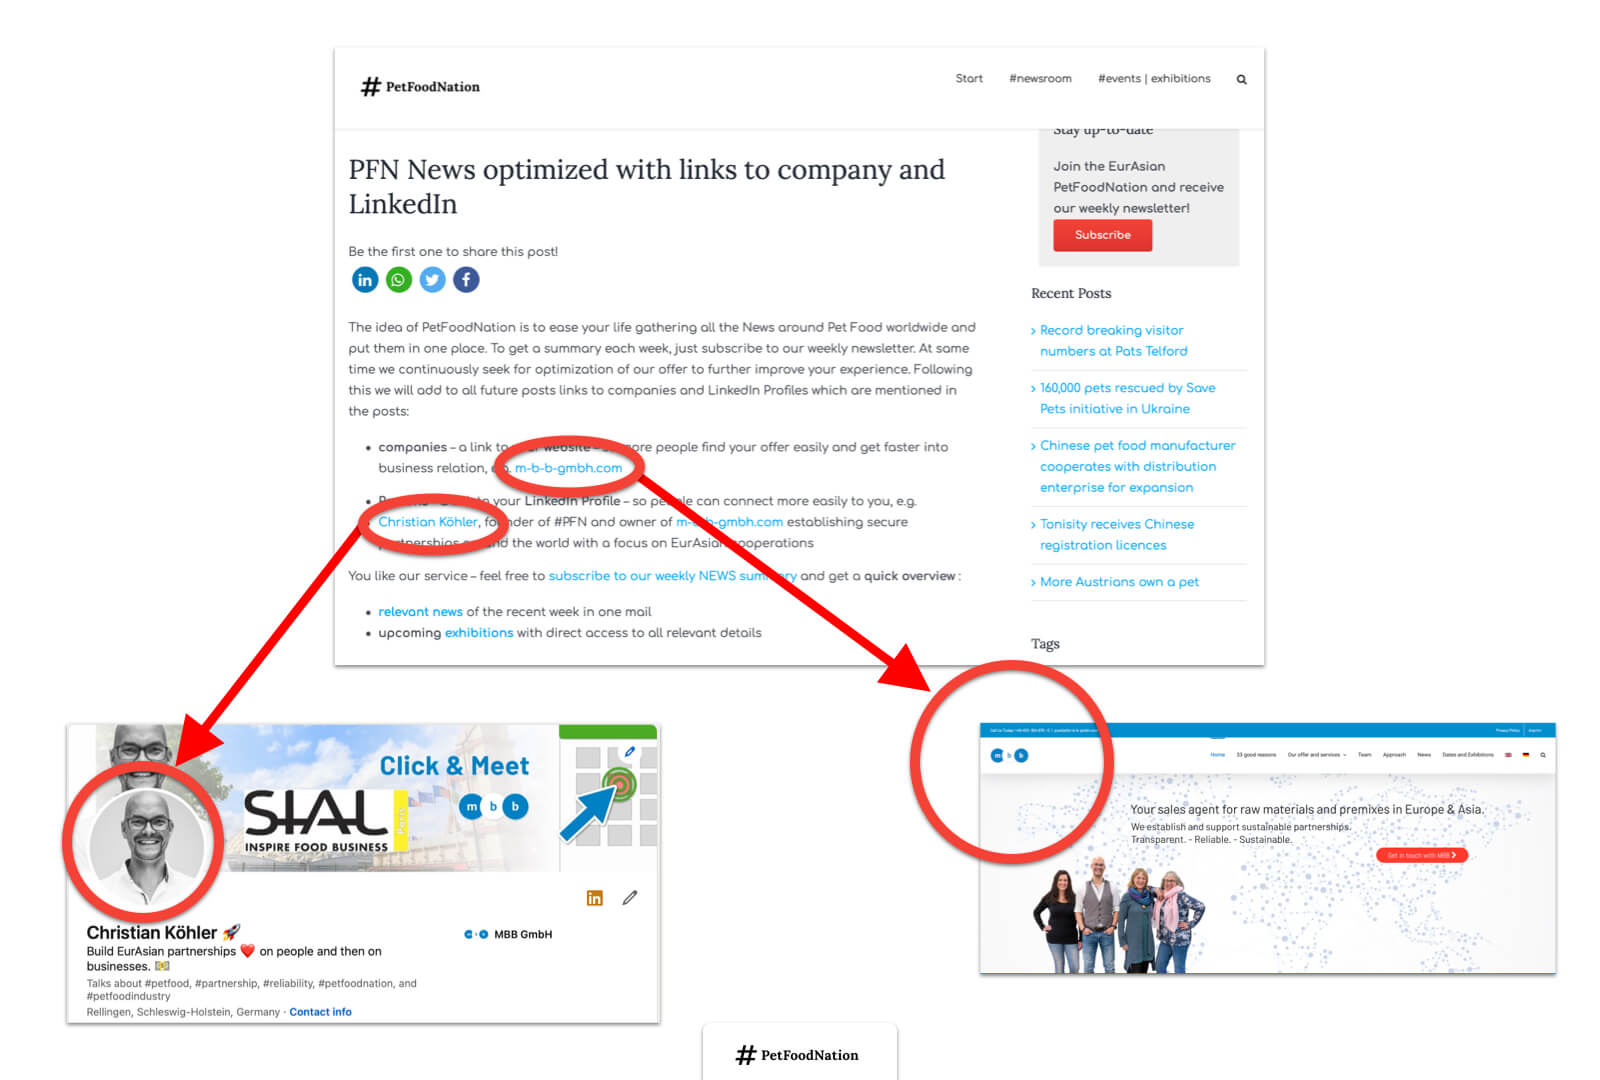 PFN News - added feature - links to company and LinkedIn